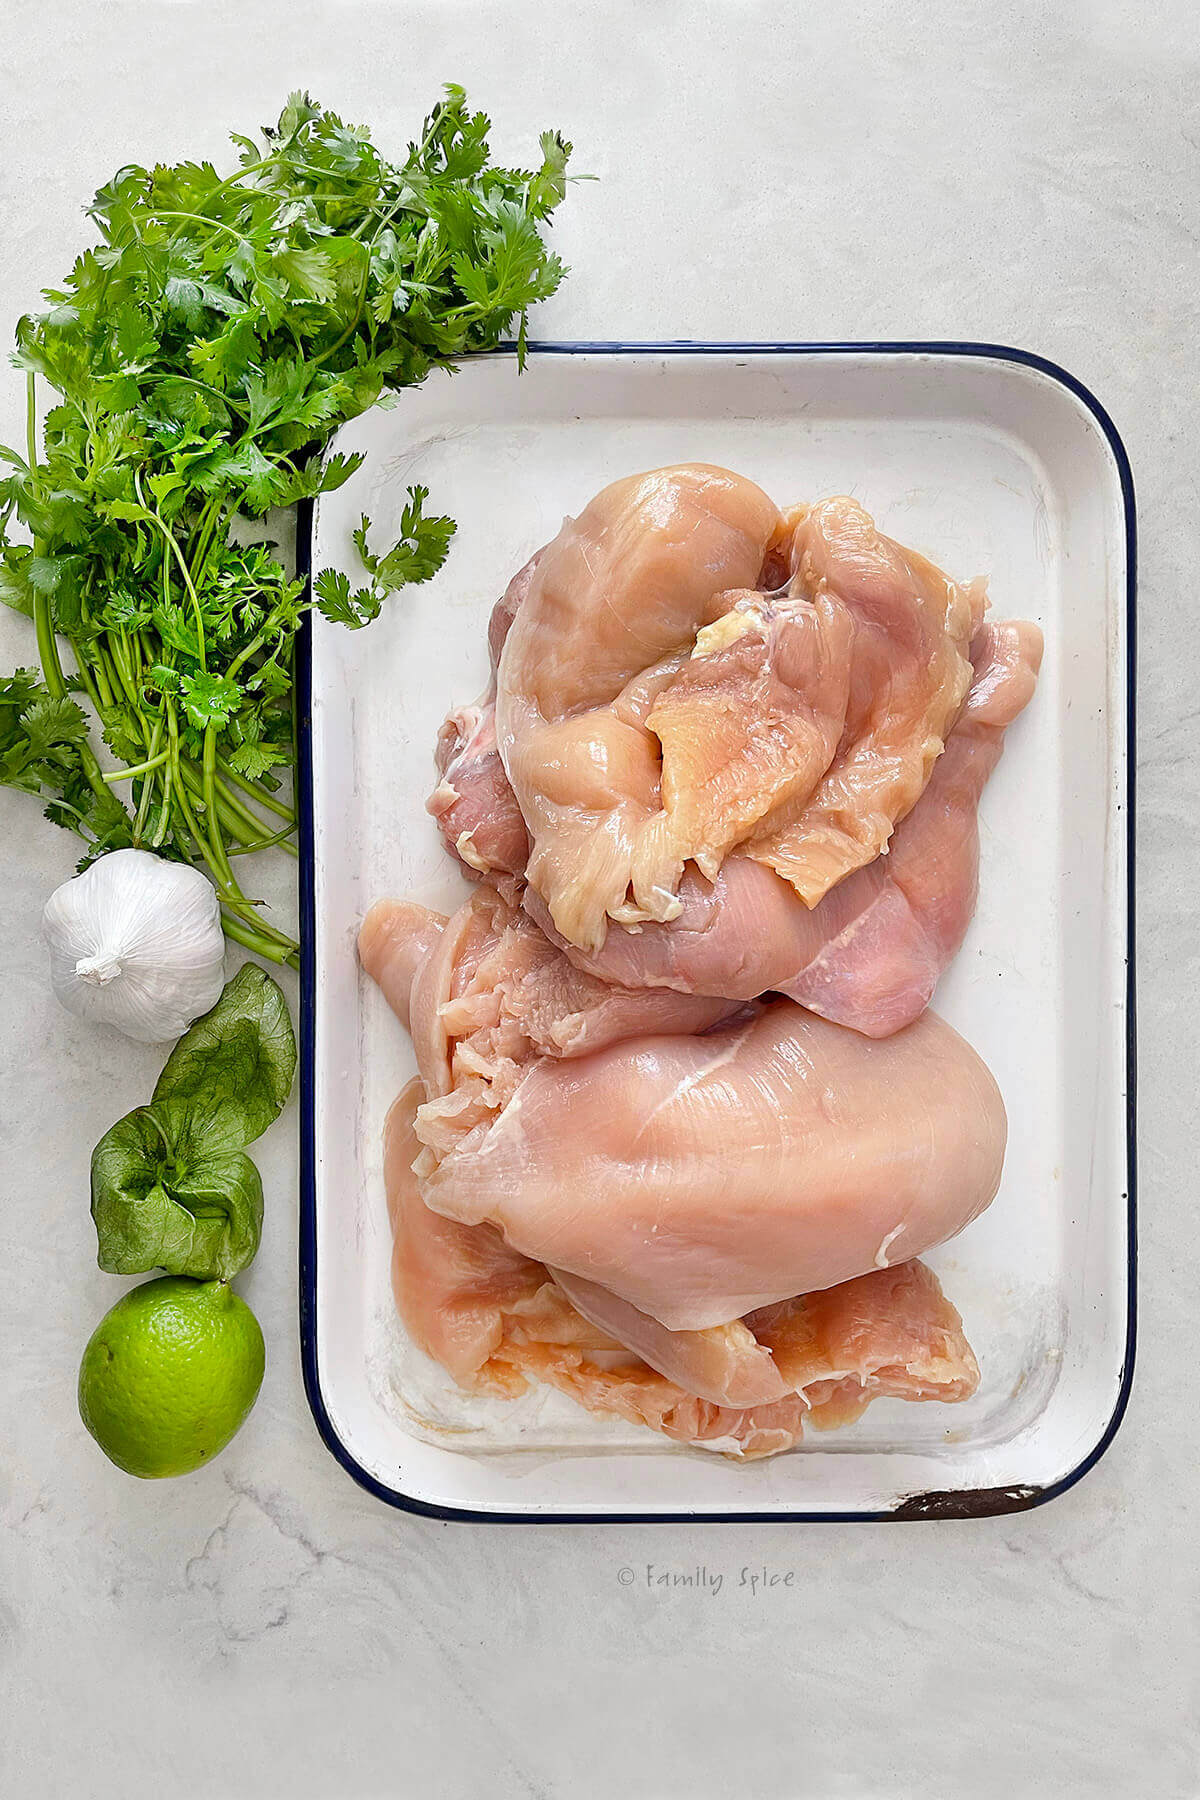 Raw chicken breasts split open on a white enamel tray with cilantro, garlic and lime next to it